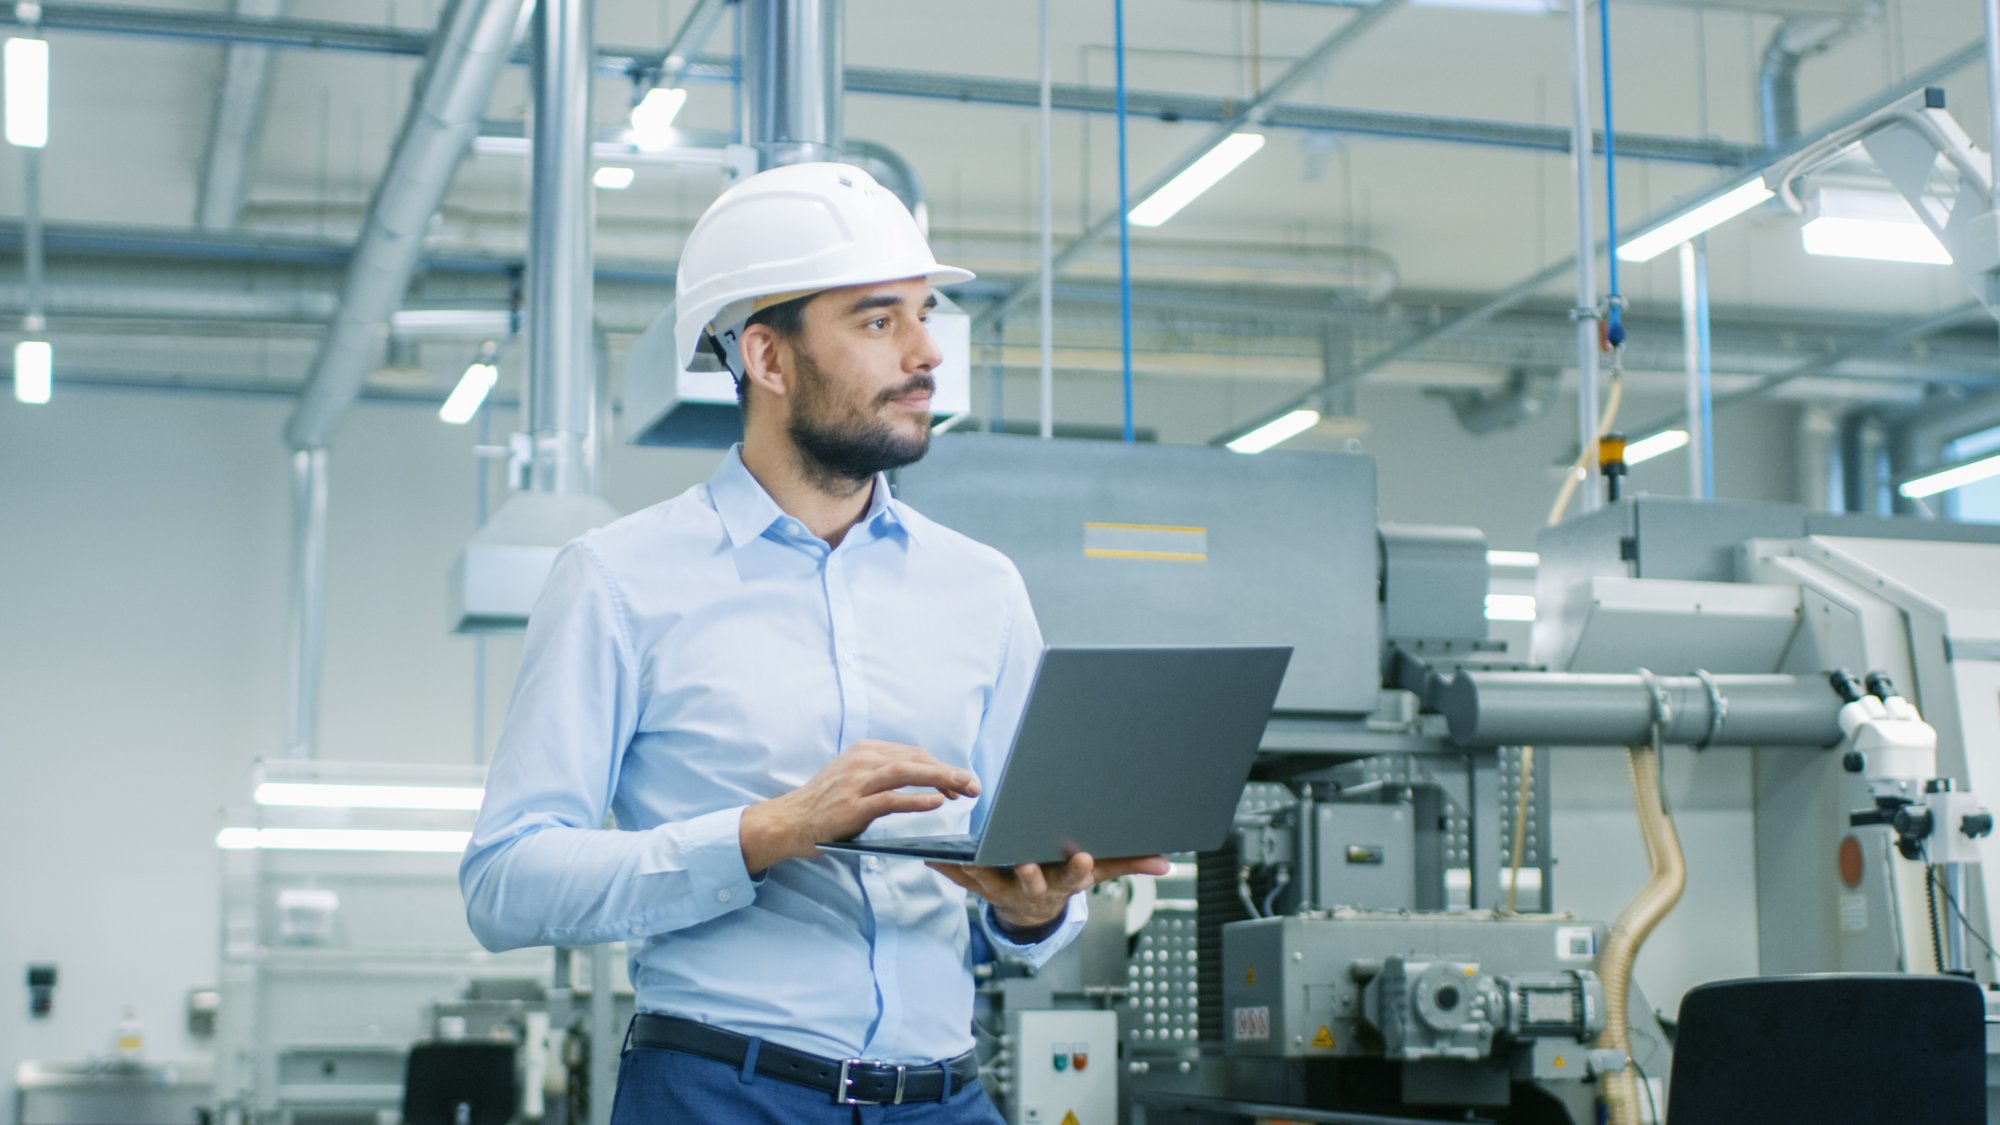 Chief engineer in a hard hat walks through light Modern factory while holding laptop. Successful, Handsome Man in Modern Industrial Environment to represent use of technology in manufacturer rep industry 